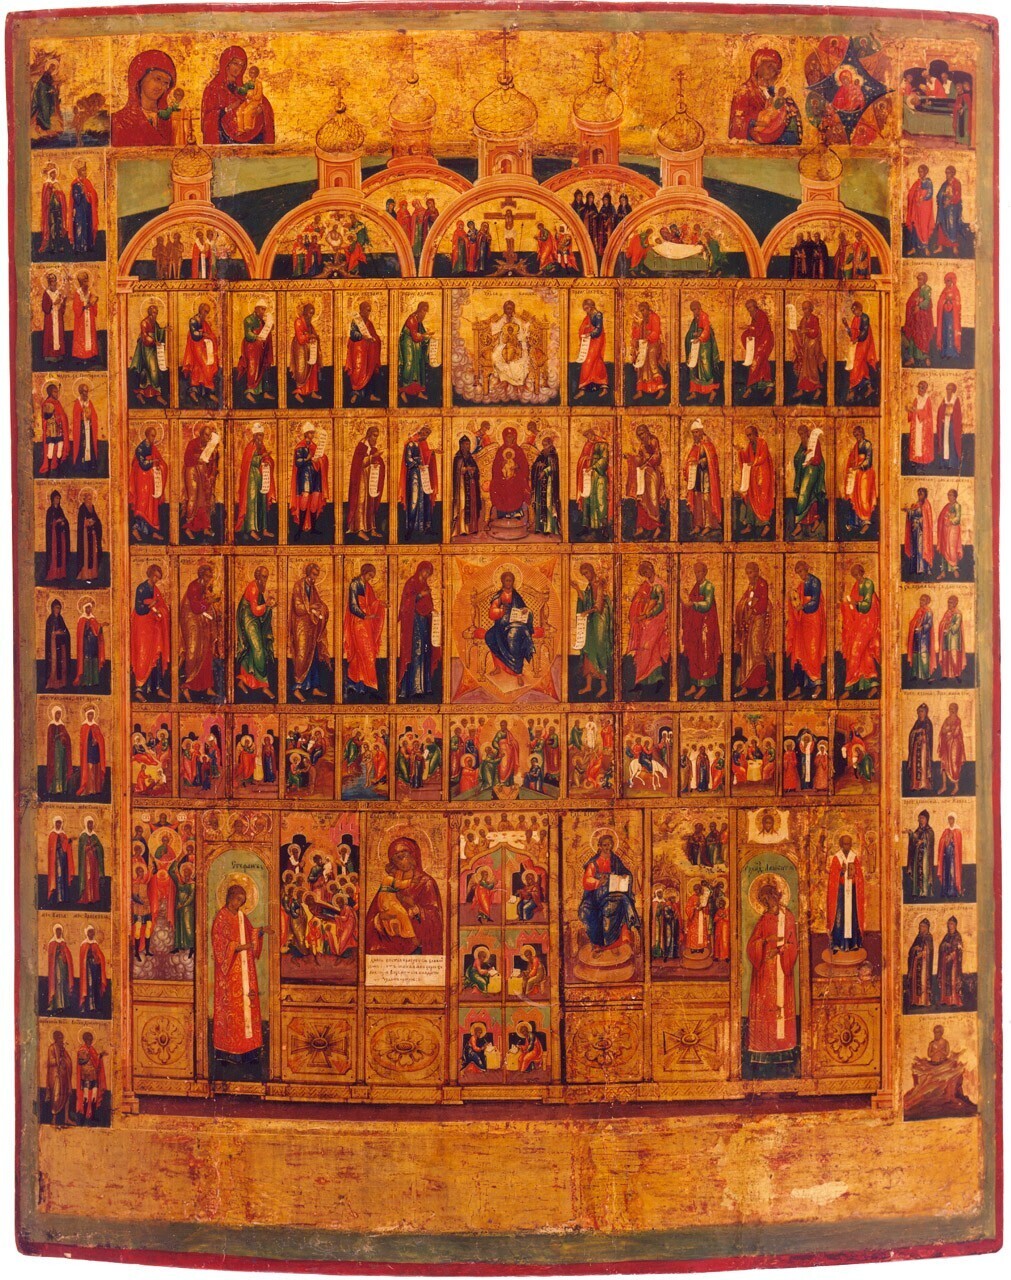 Depiction of an iconostasis